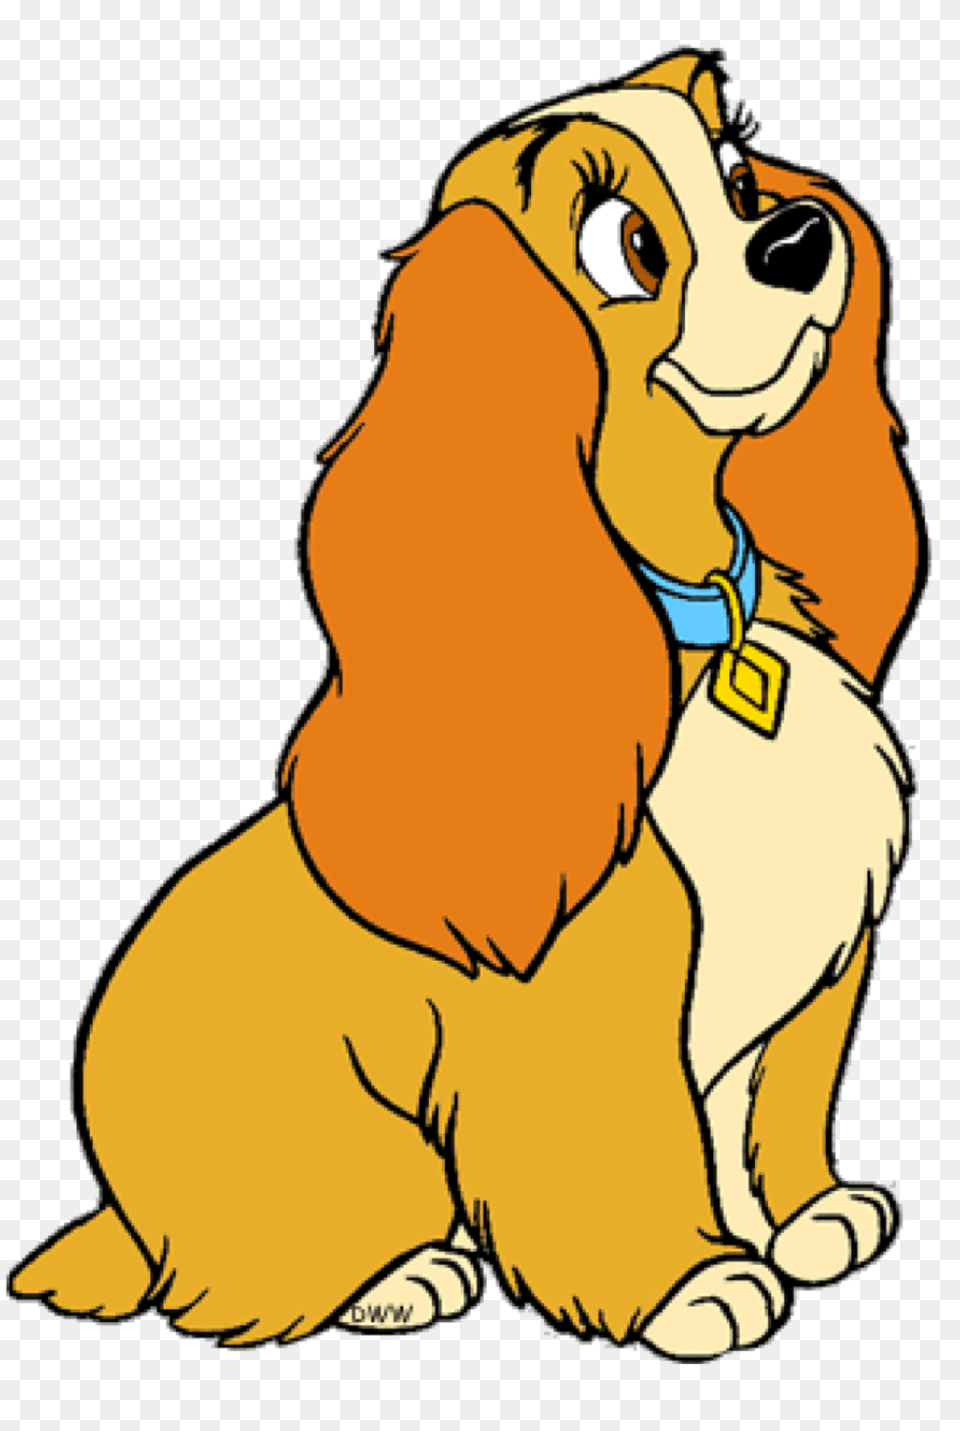 Disneys Lady And The Tramp Images Clip Art Hd Fond, Animal, Canine, Dog, Hound Png Image